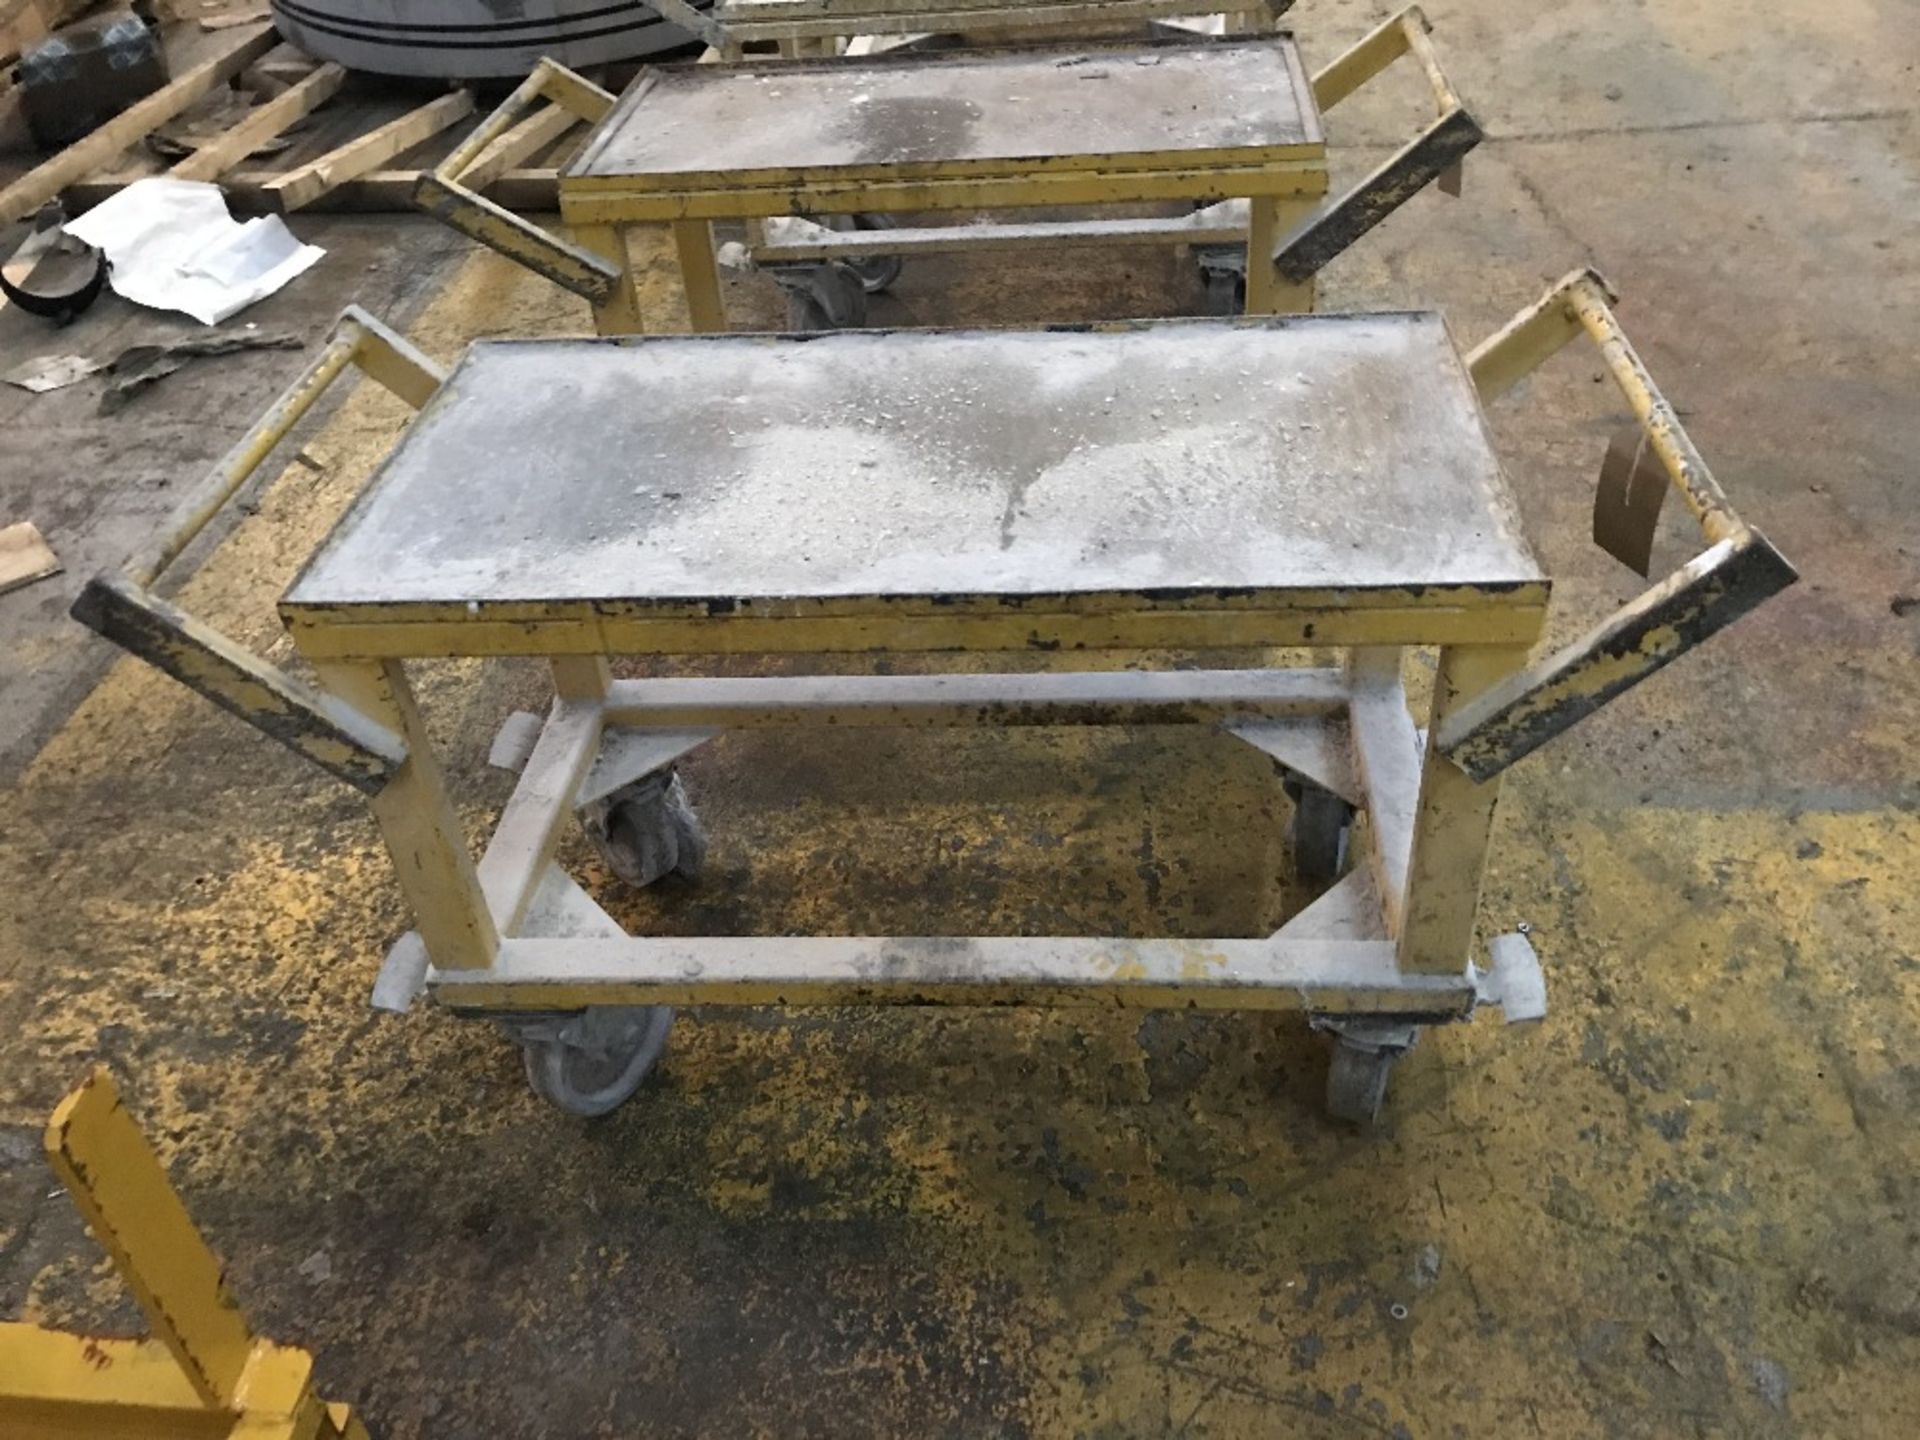 Yellow steel fabricated product trolley on casters - Image 3 of 3